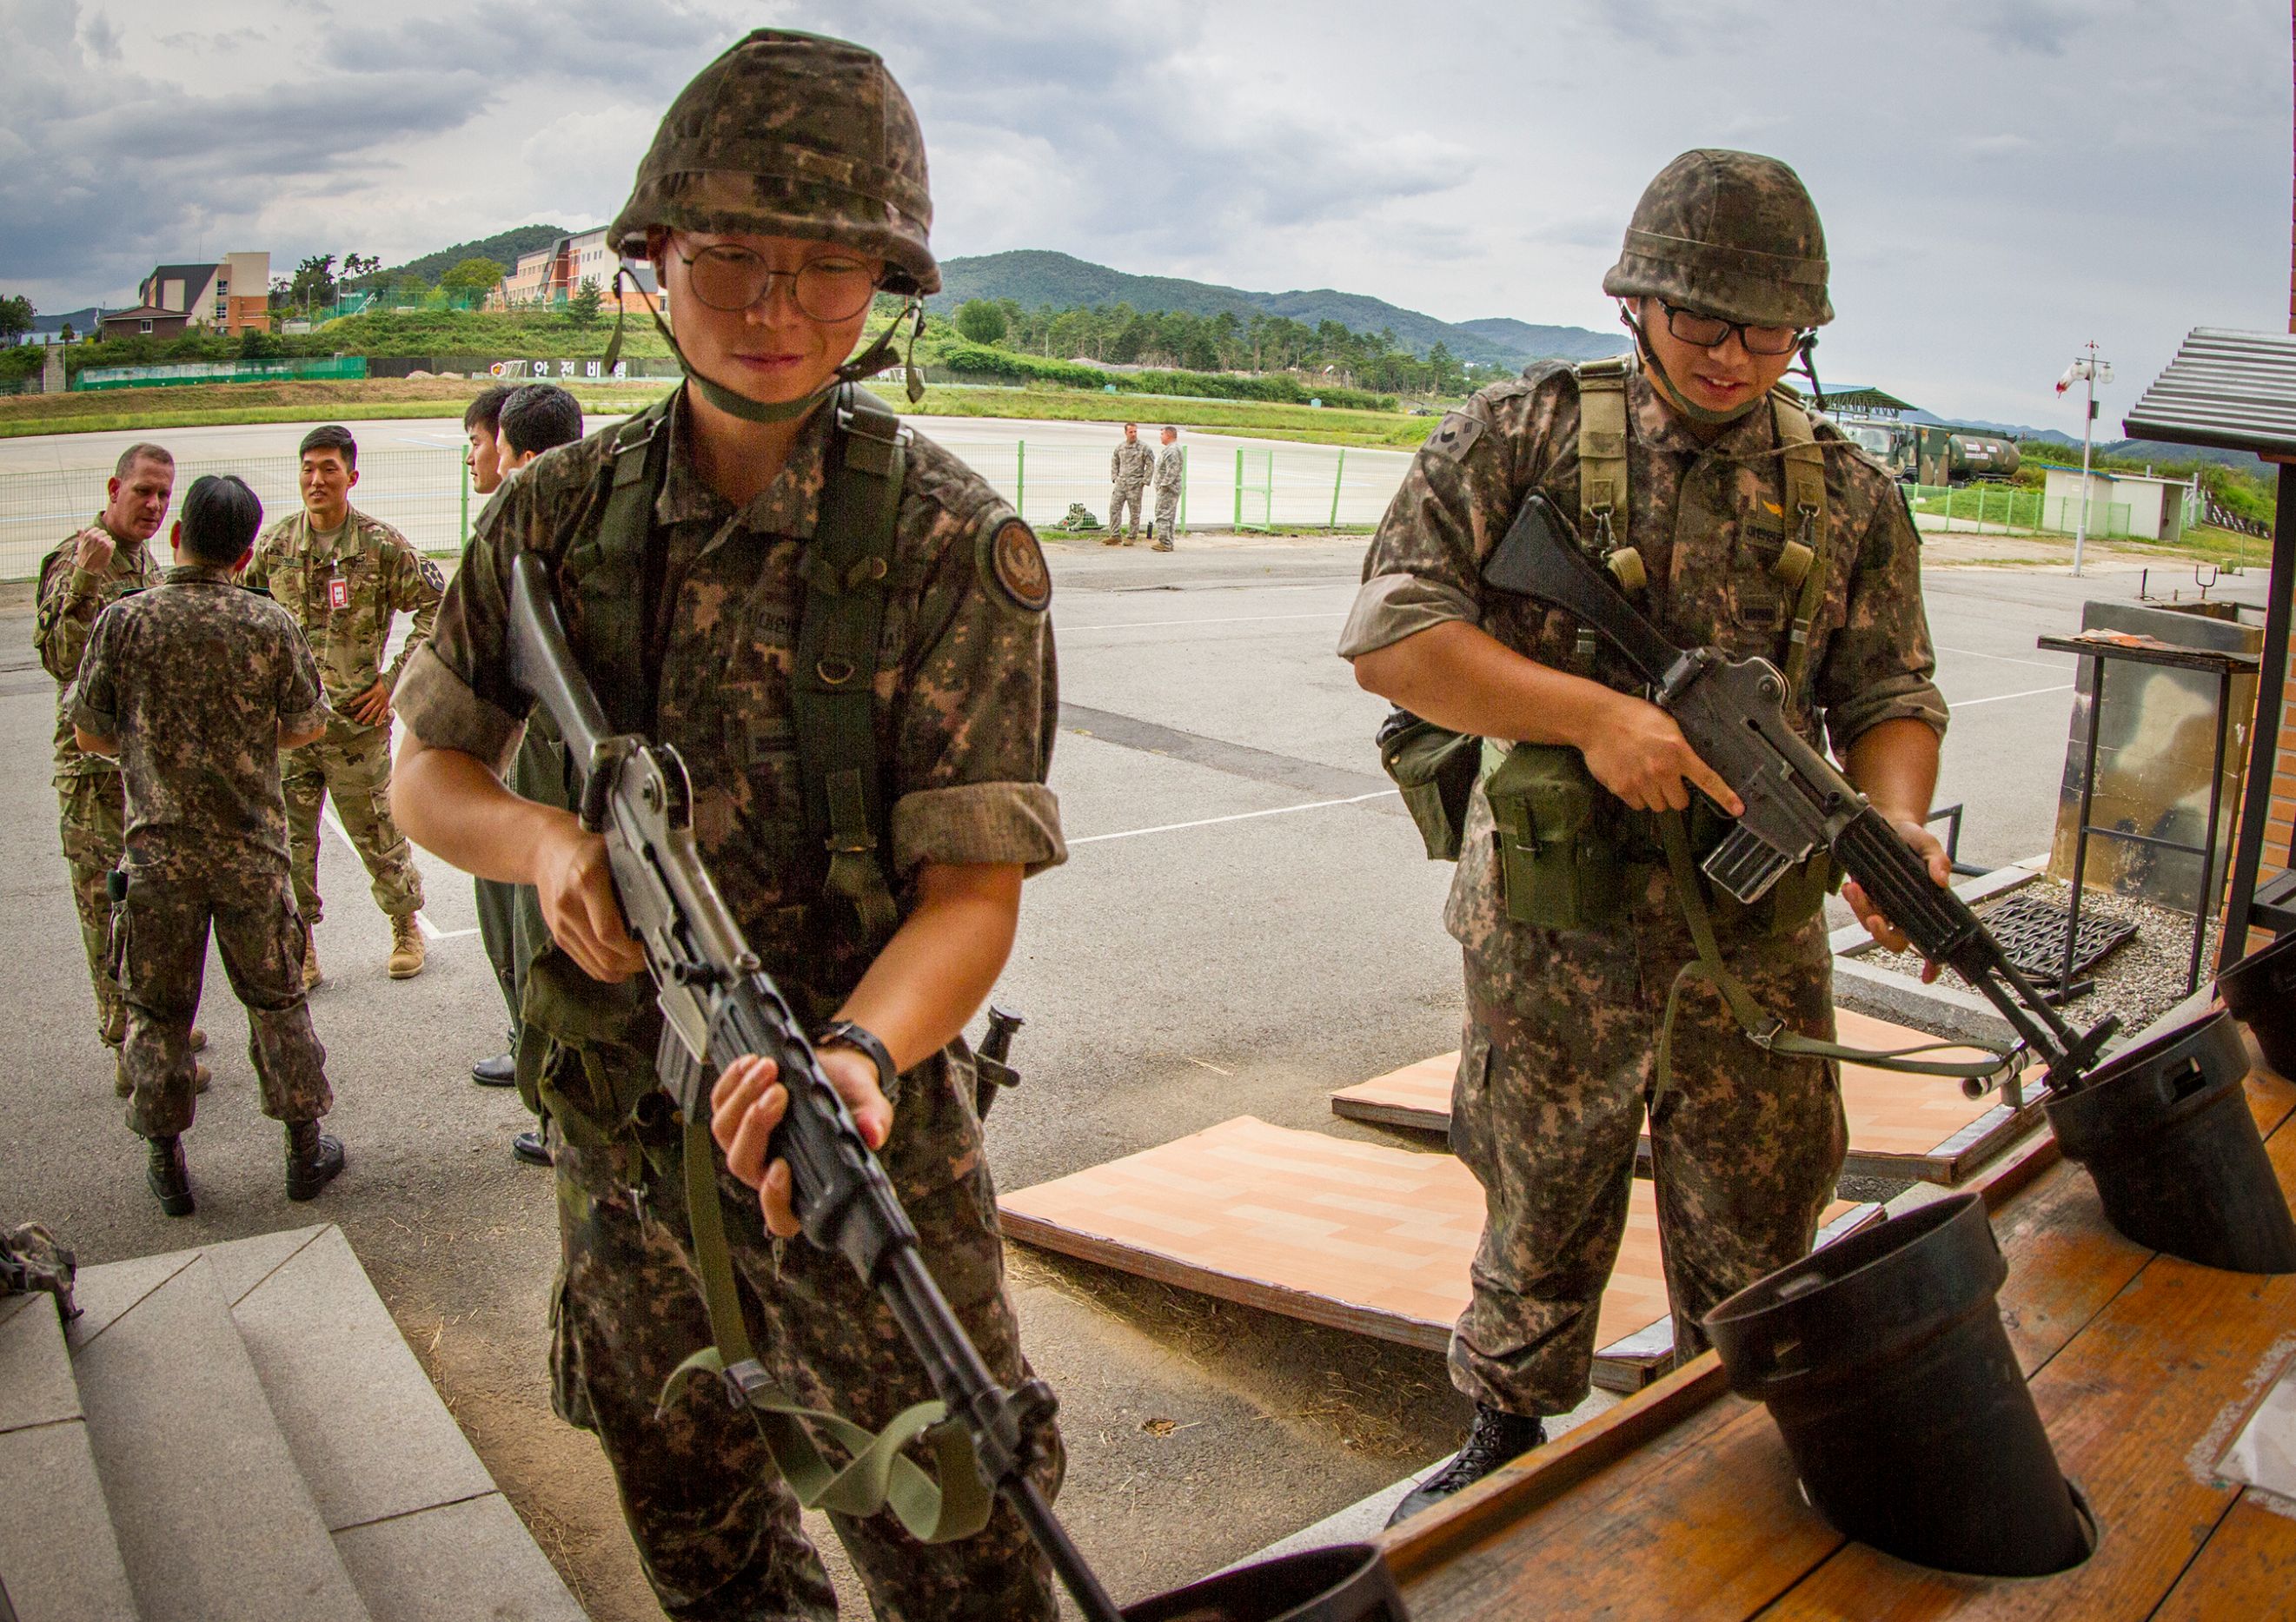 Two South Korean soldiers clear their weapons at an airfield in Yongin, South Korea, Aug. 29, 2016. (U.S. Army photo by Staff Sgt. Ken Scar)